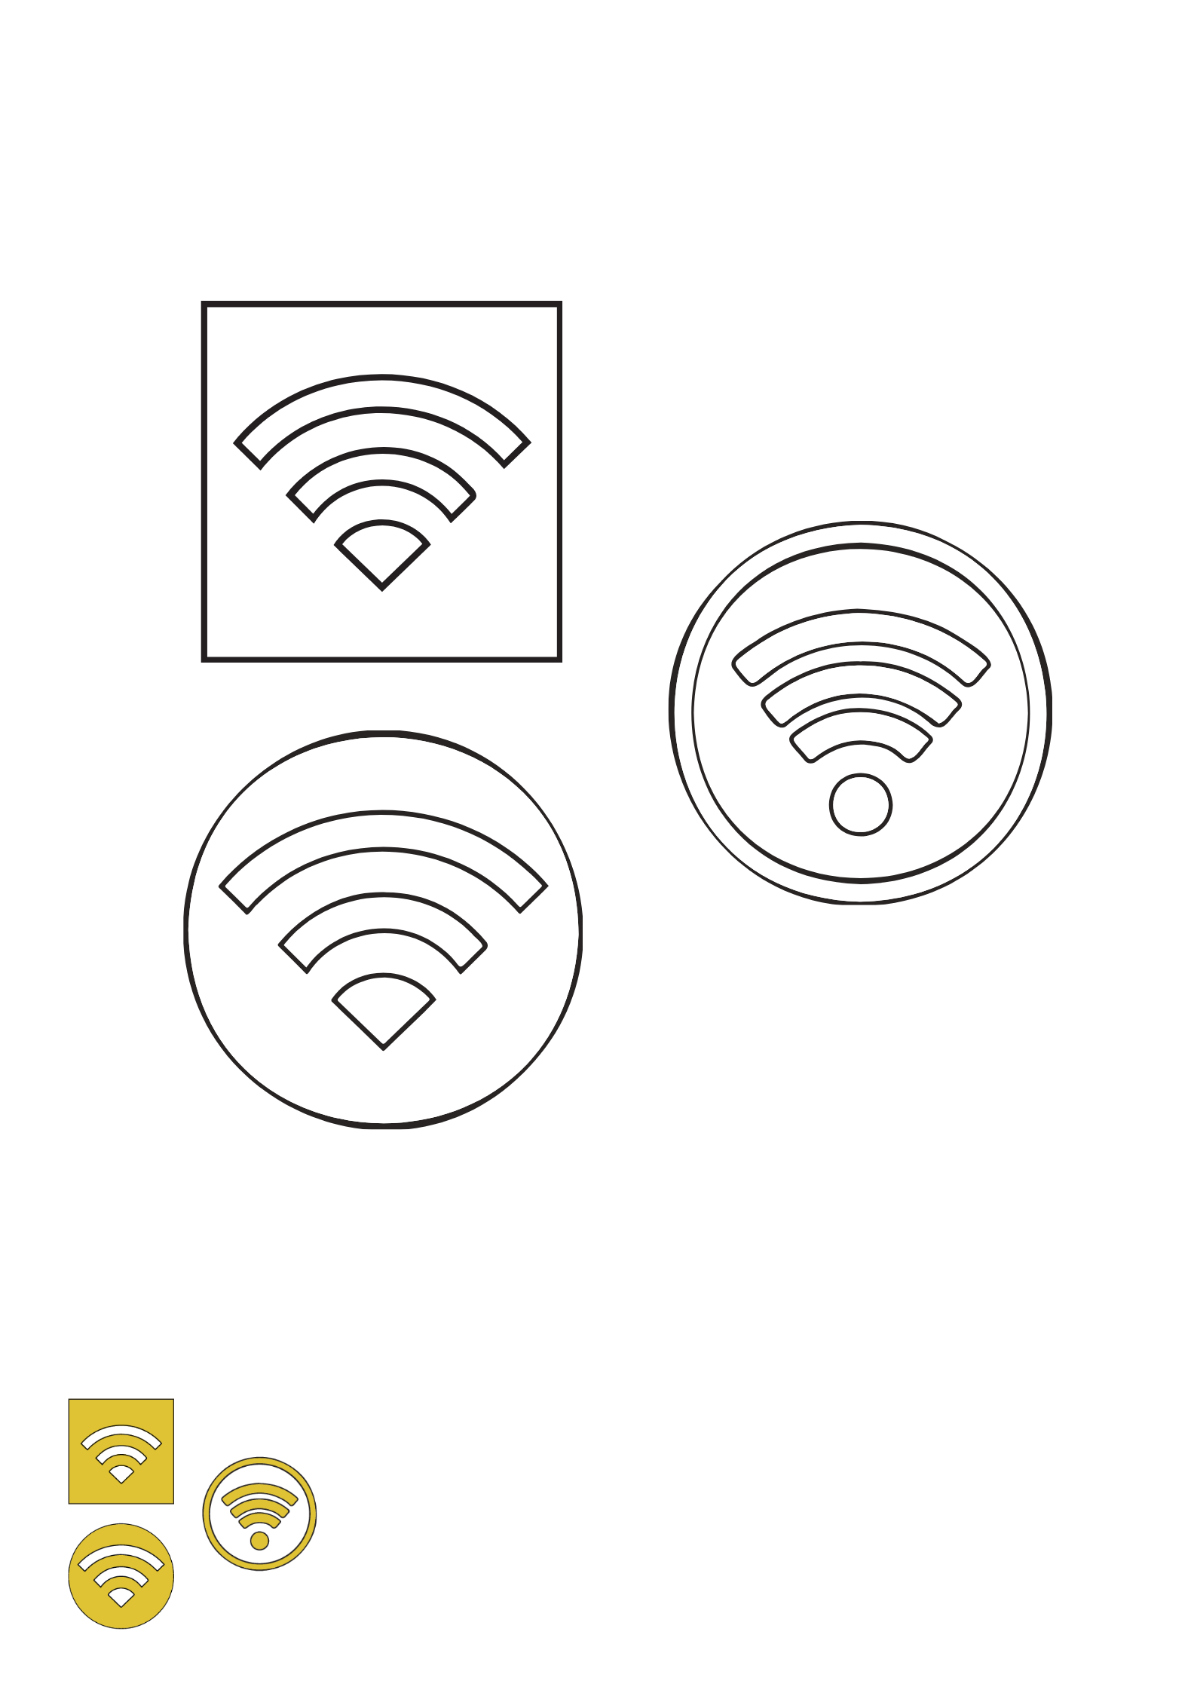 Gold Wifi coloring page